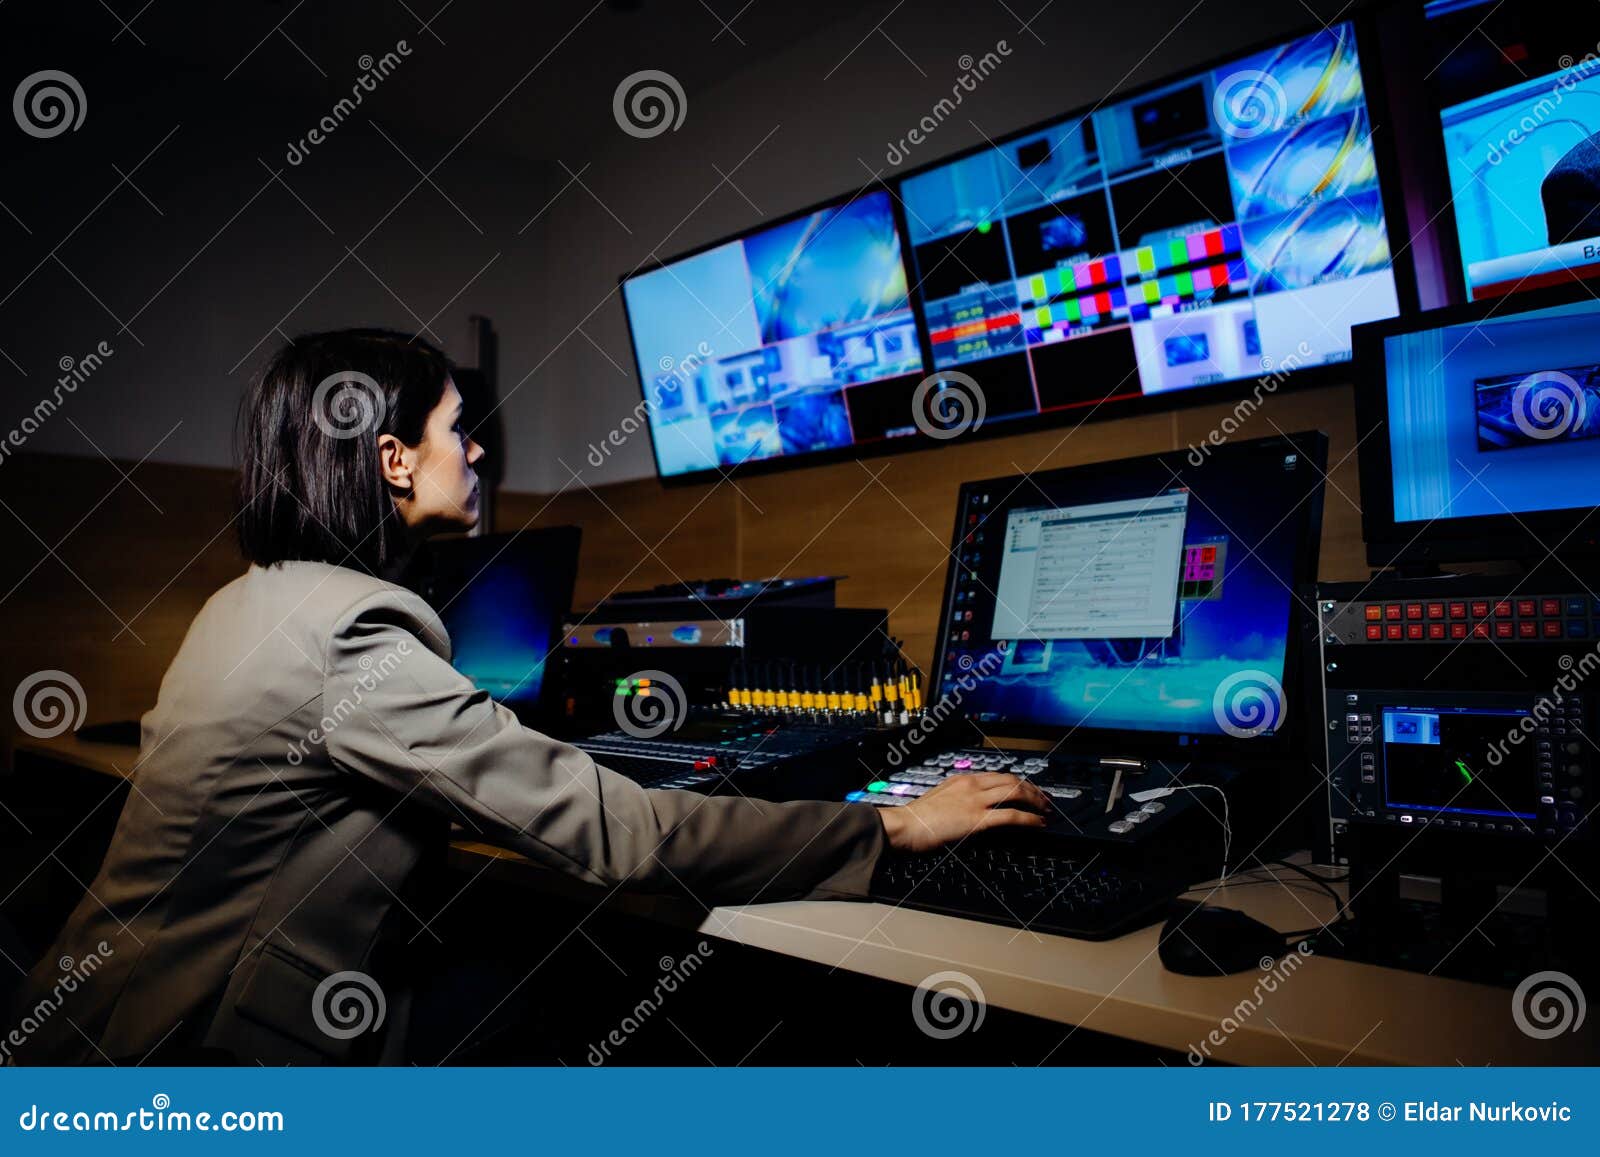 female tv director control editing room in television studio.operating vision mixer console equipment in a broadcast panel gallery